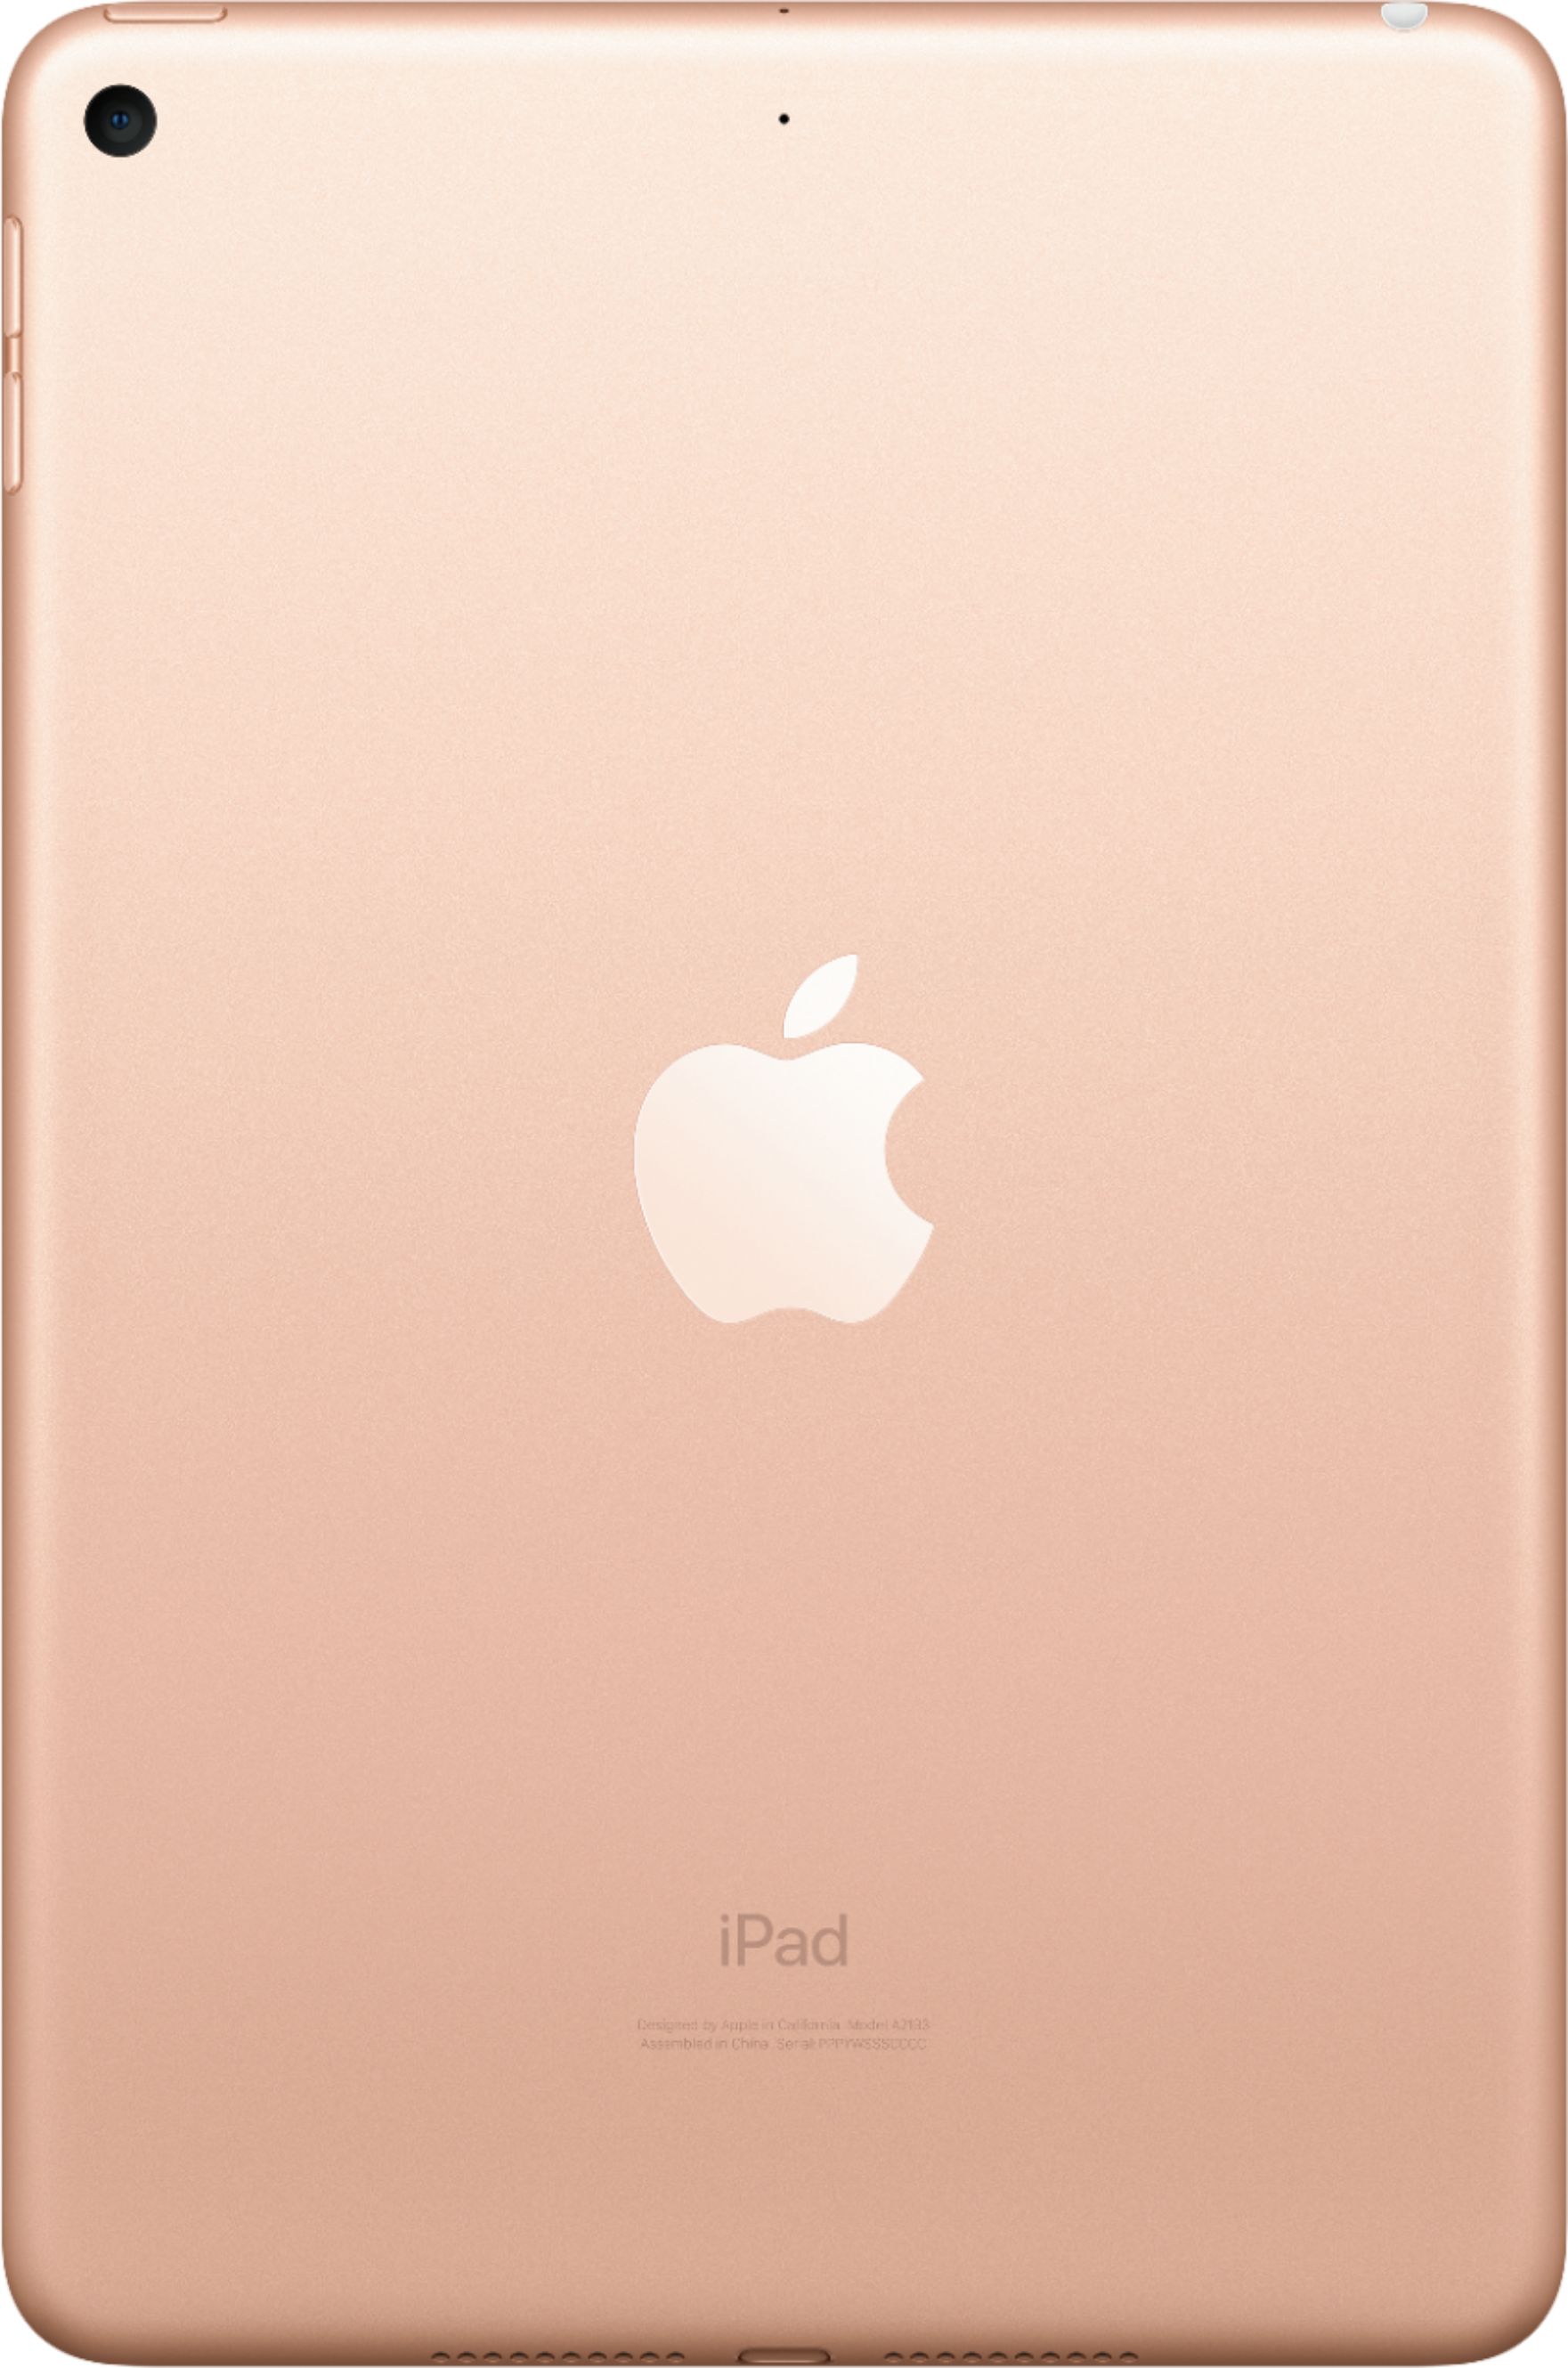 Back View: Apple - iPad mini (Latest Model) with Wi-Fi + Cellular - 256GB - Pink (AT&T)